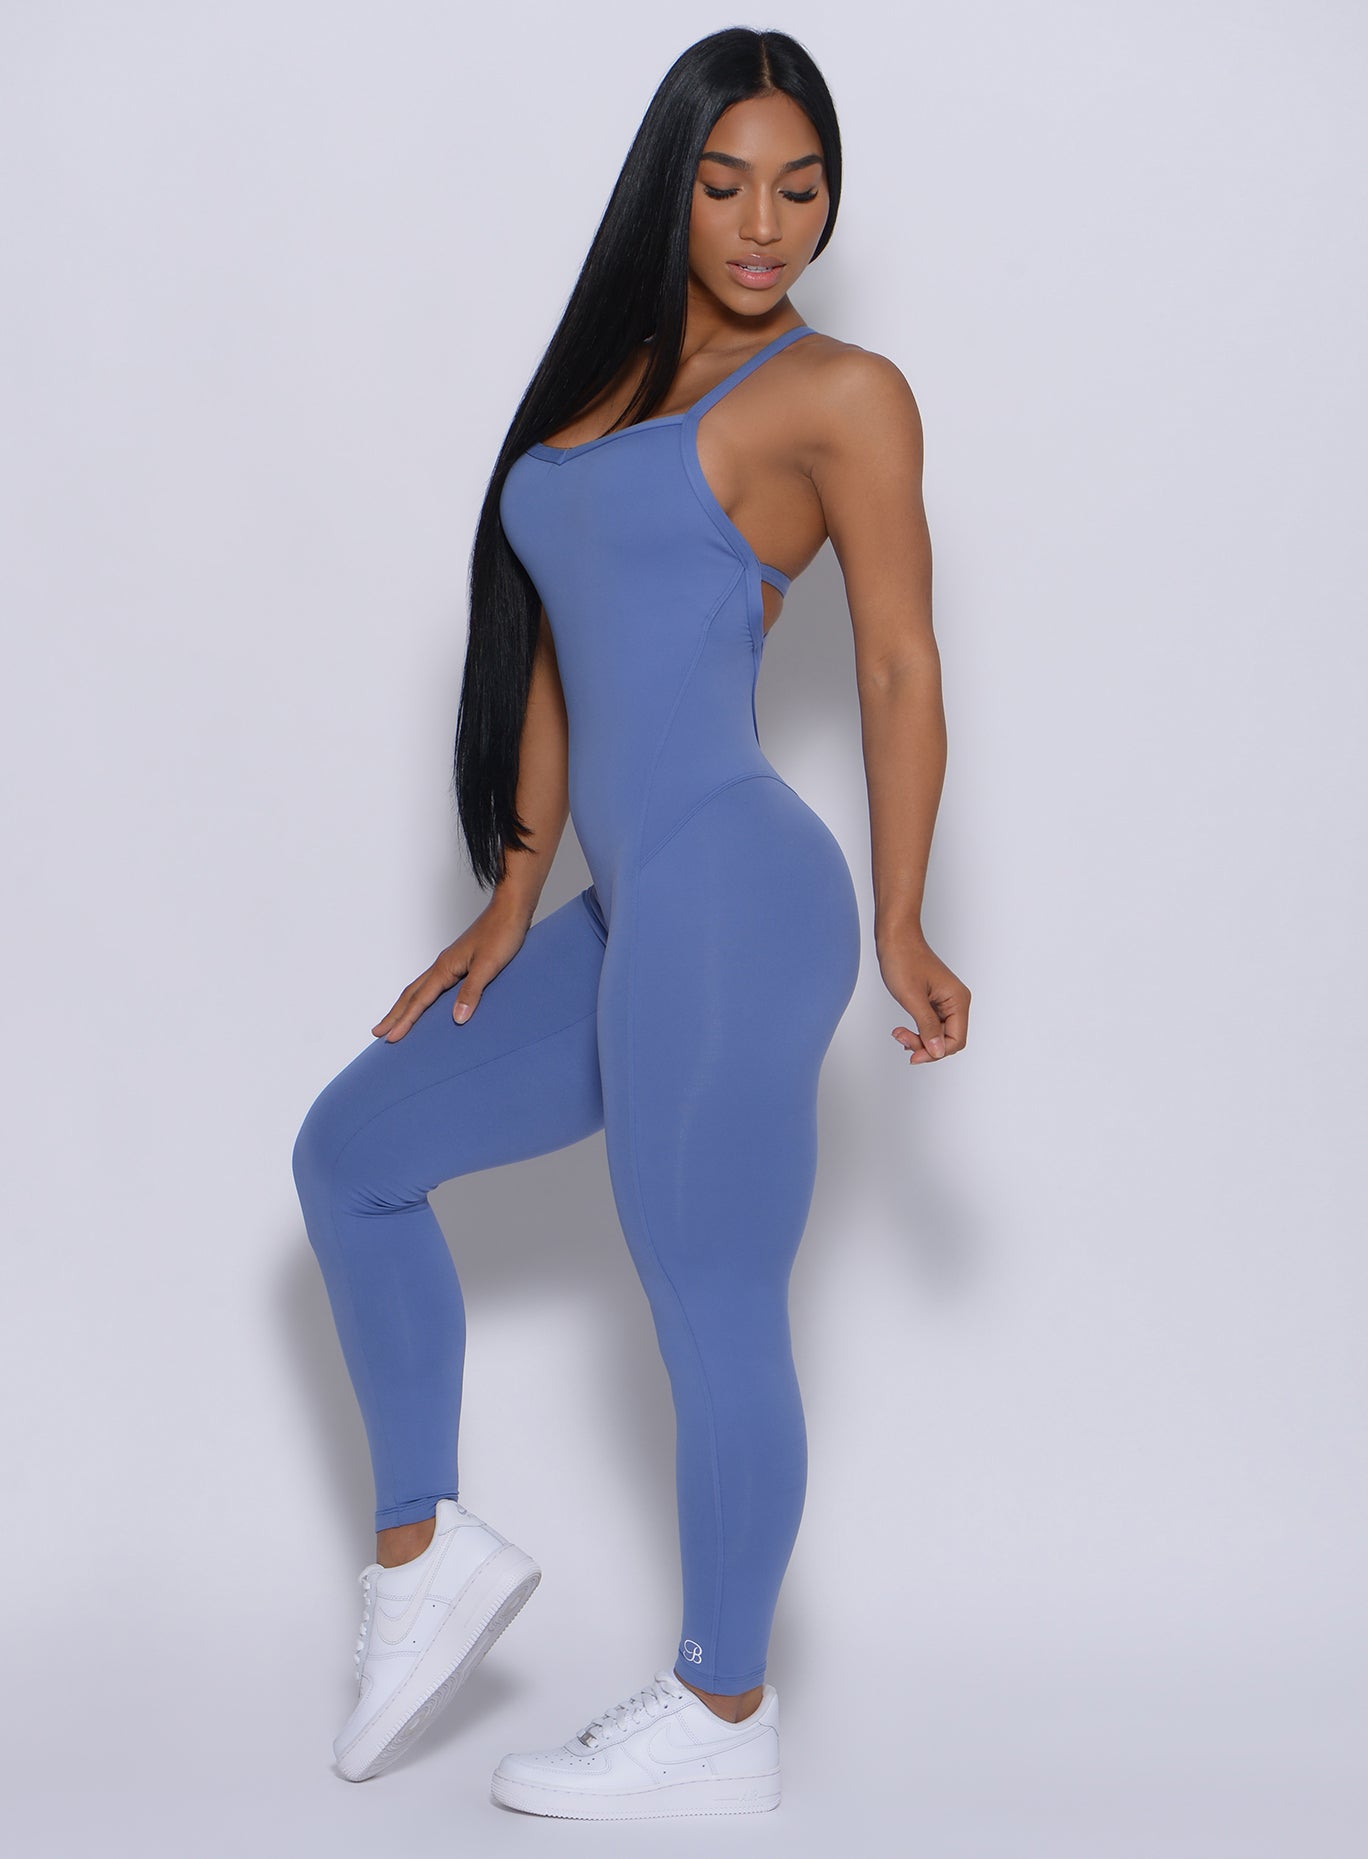 Left side profile view of a model angled left wearing our sculpted bodysuit in denim blue color